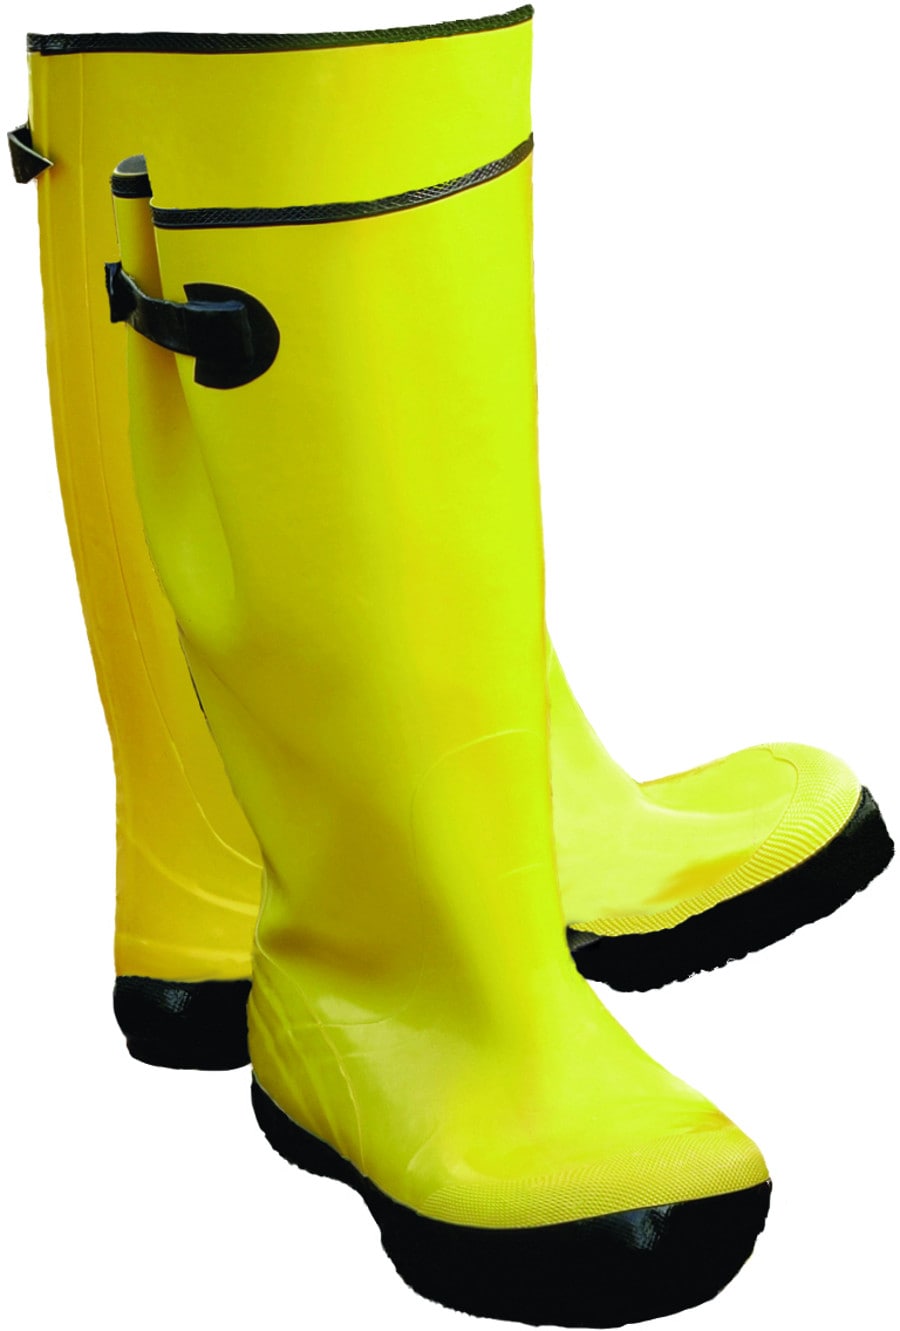 West Chester Mens Yellow Waterproof Rubber Boots Size: 11 Medium